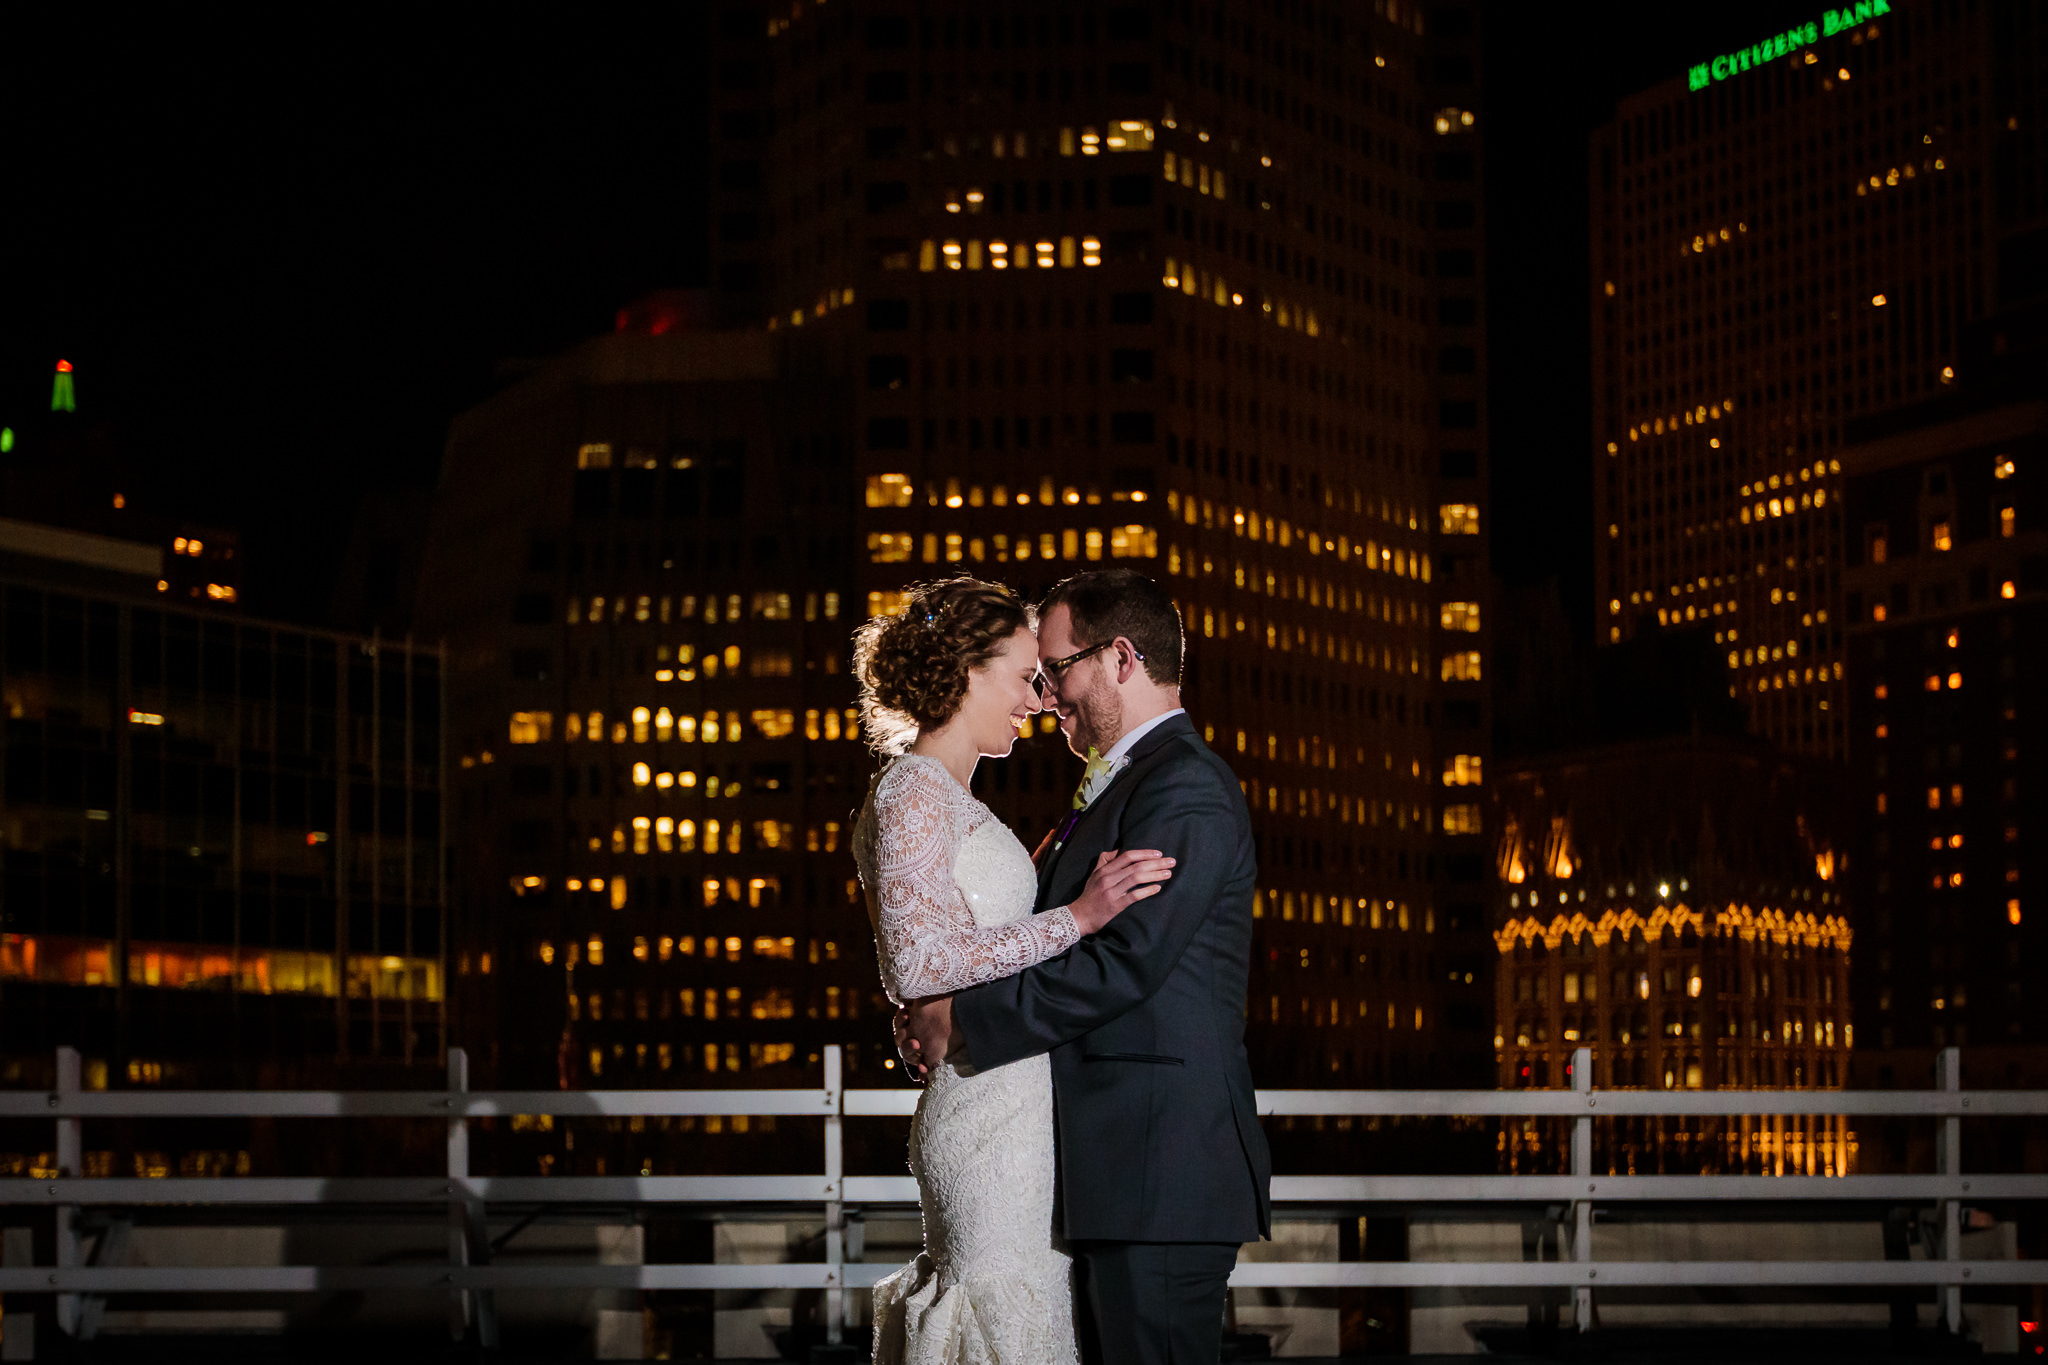 Night wedding photo on the patio of the DoubleTree Pittsburgh Downtown